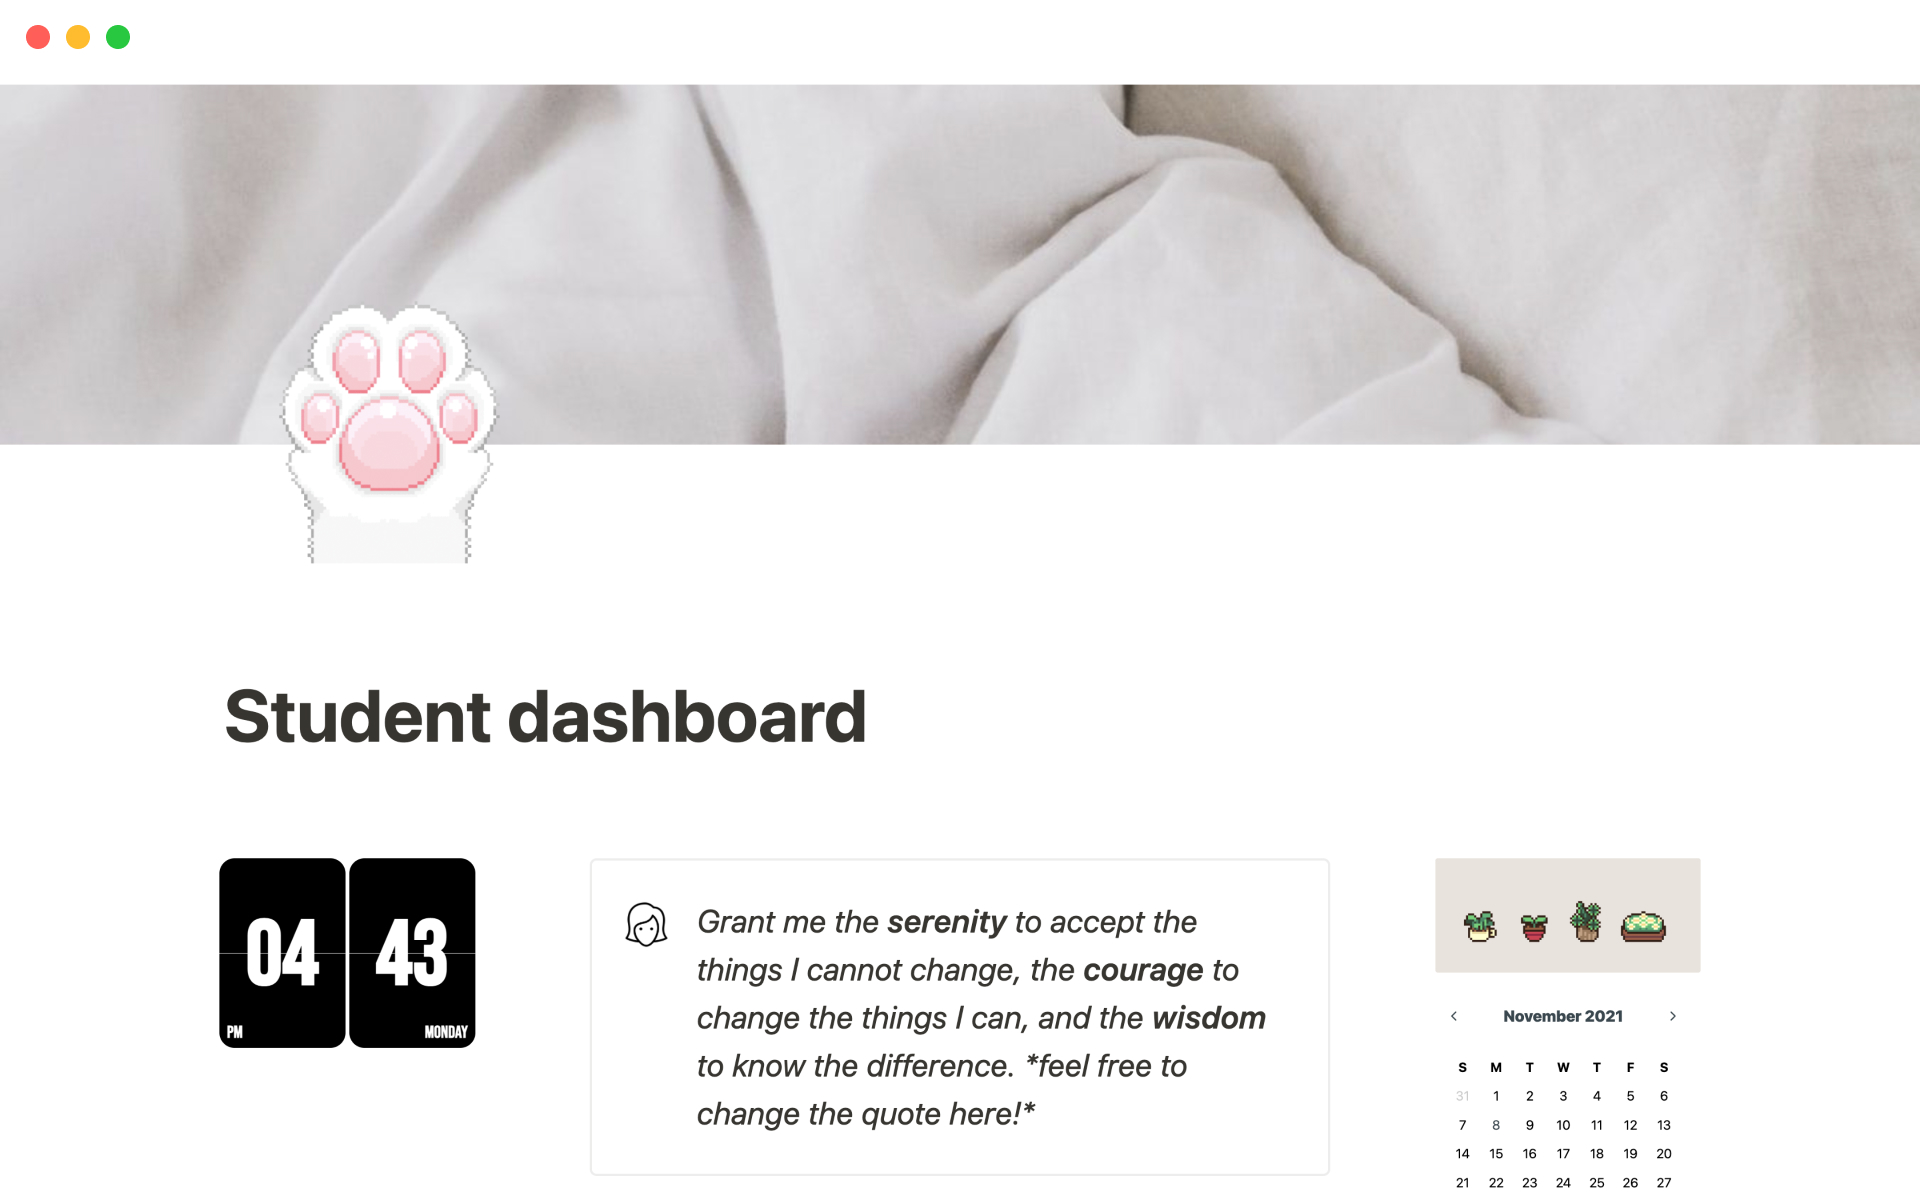 The desktop image for the Student dashboard template